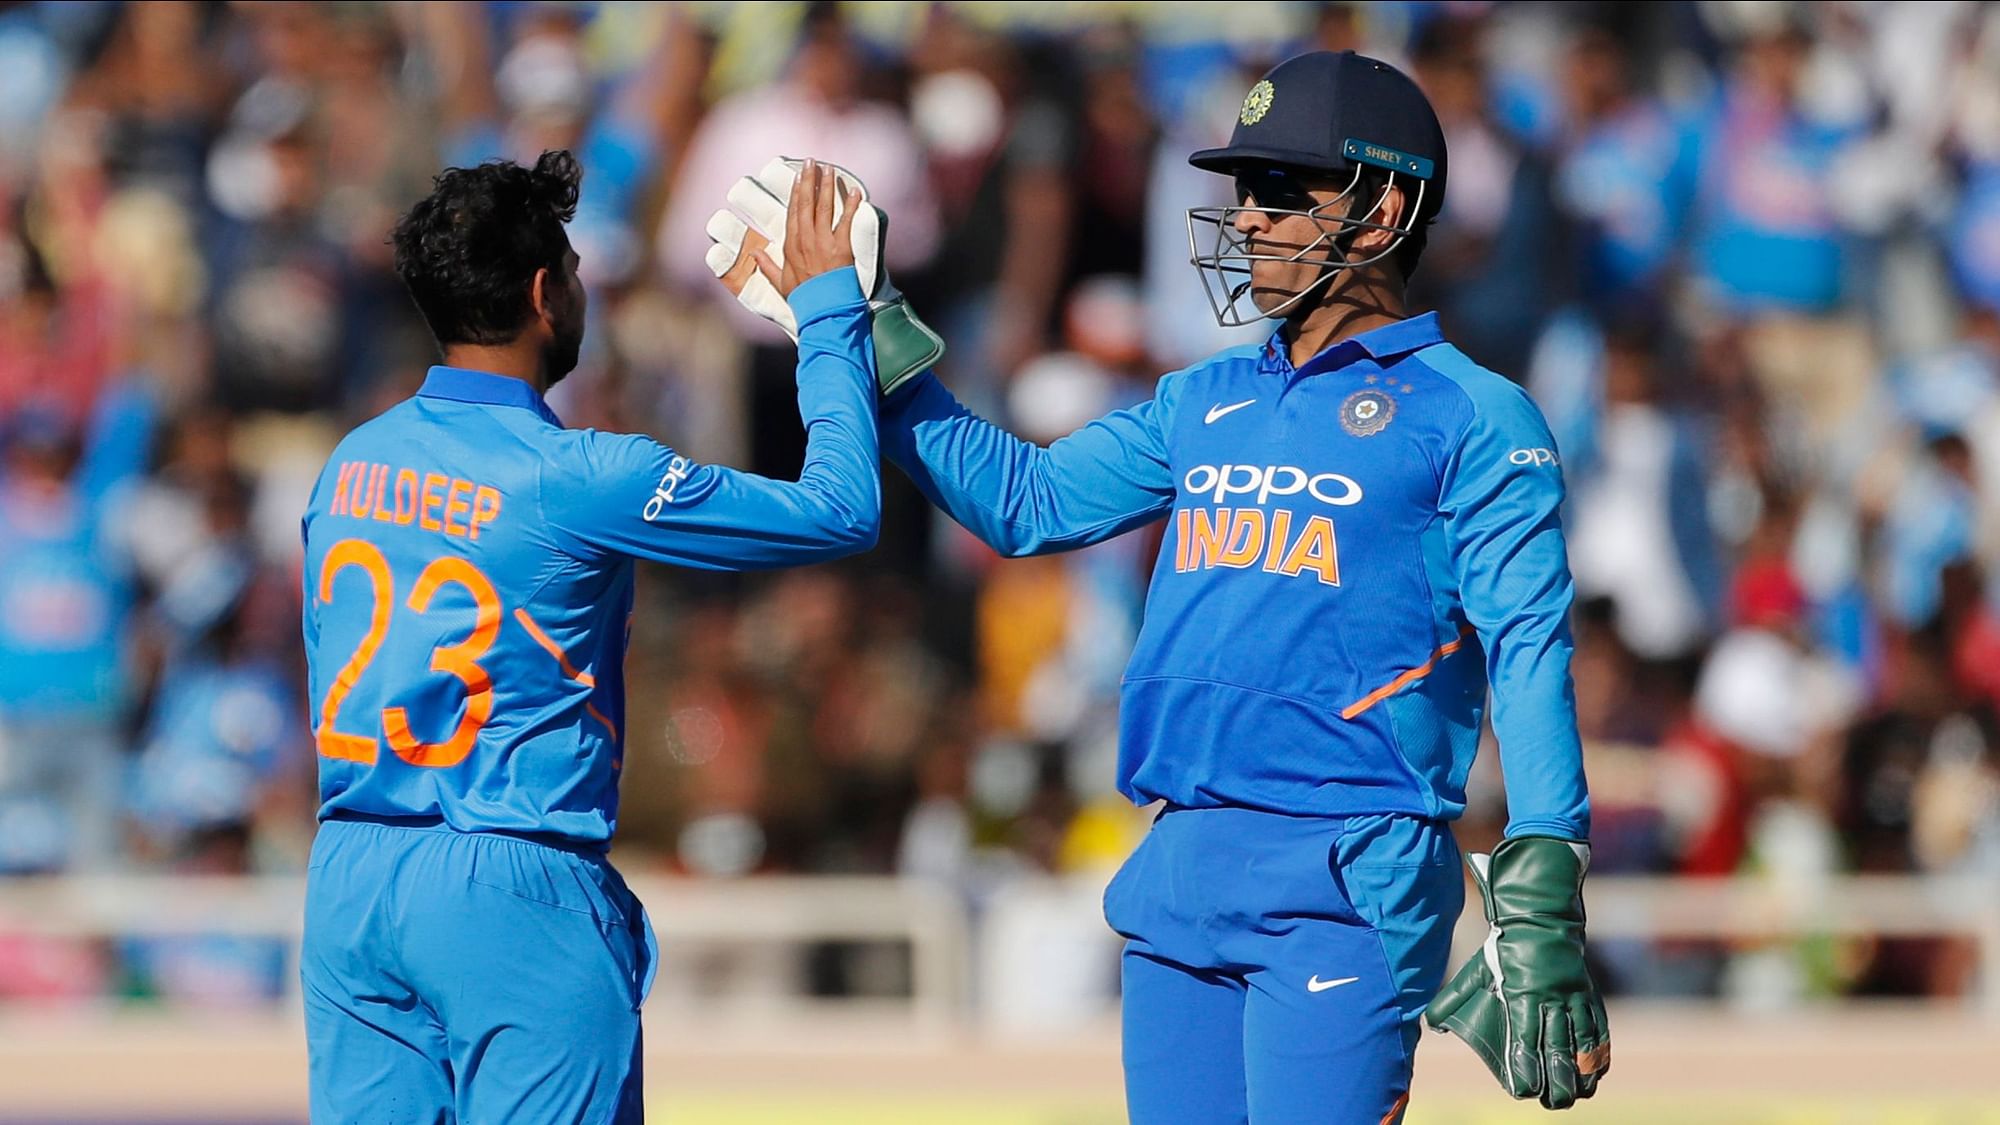 MS Dhoni celebrates a wicket with Kuldeep Yadav during the third ODI between India and Australia at Ranchi.